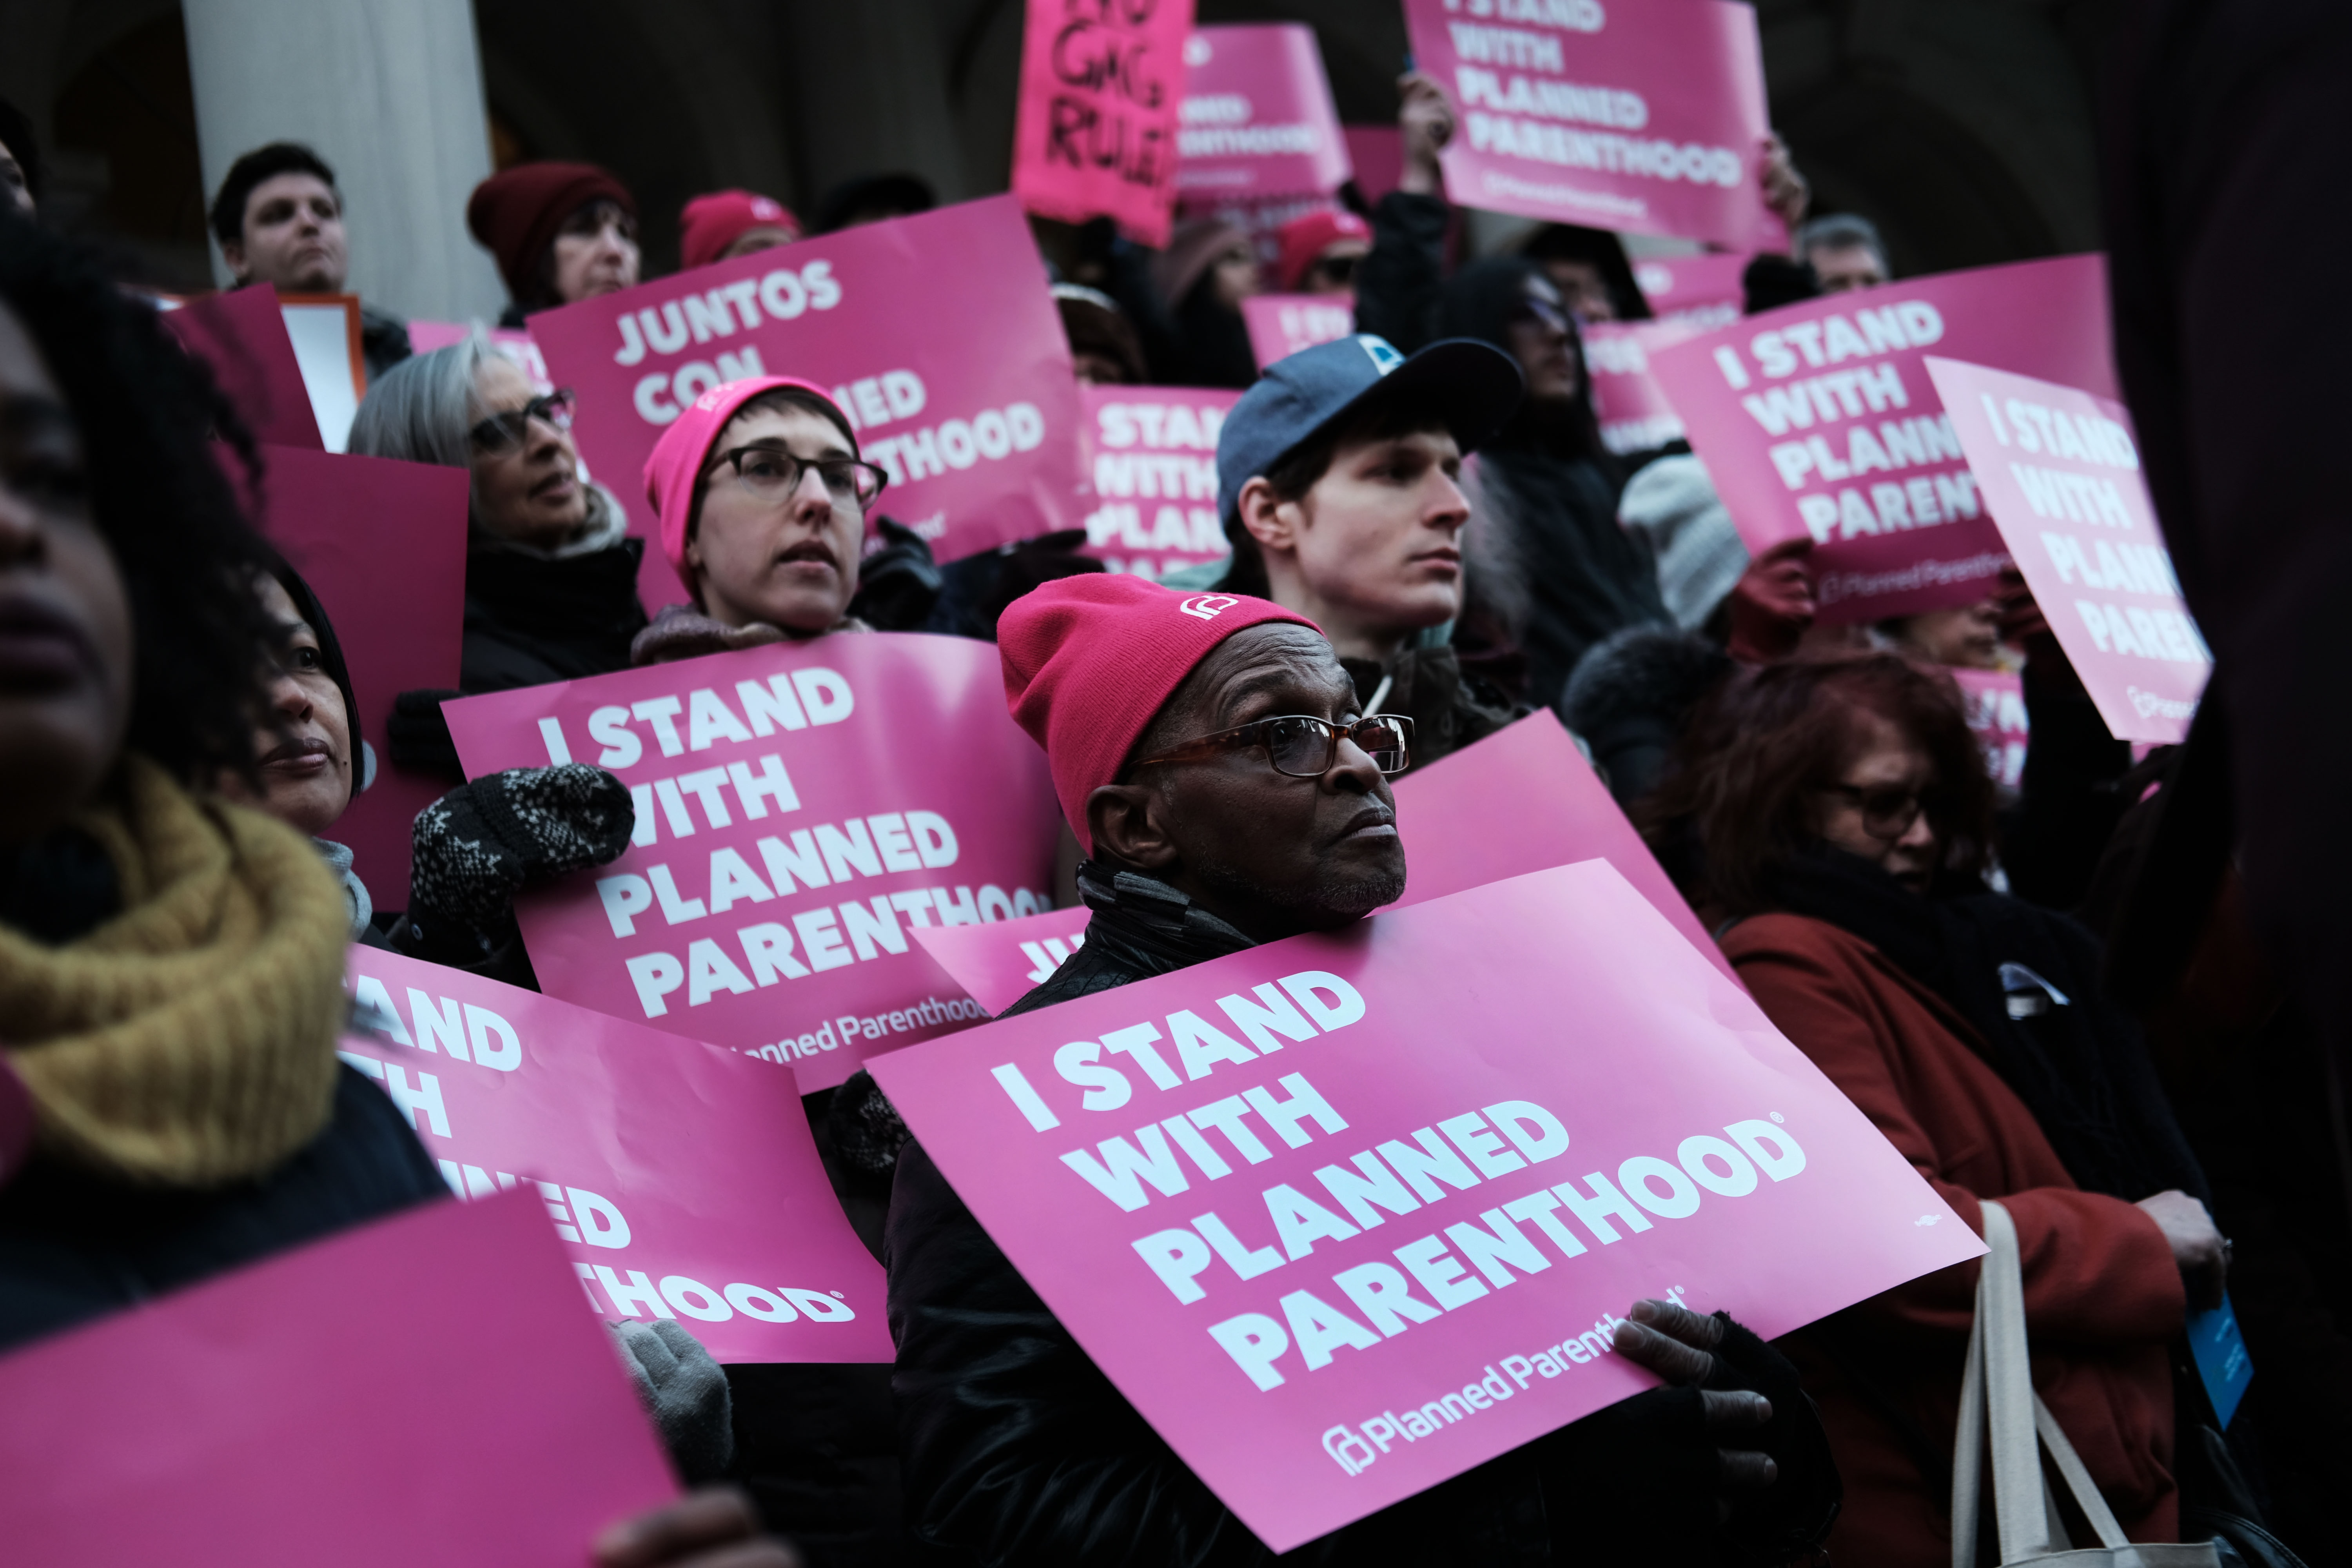 NEW YORK, NEW YORK - FEBRUARY 25: Pro-choice activists, politicians and others associated with Planned Parenthood gather for a news conference and demonstration at City Hall against the Trump administrations title X rule change on February 25, 2019 in New York City. The proposed final rule for the Title X Family Planning Program, called the “Gag Rule,” would force a medical provider receiving federal assistance to refuse to promote, refer for, perform or support abortion as a method of family planning. (Photo by Spencer Platt/Getty Images)